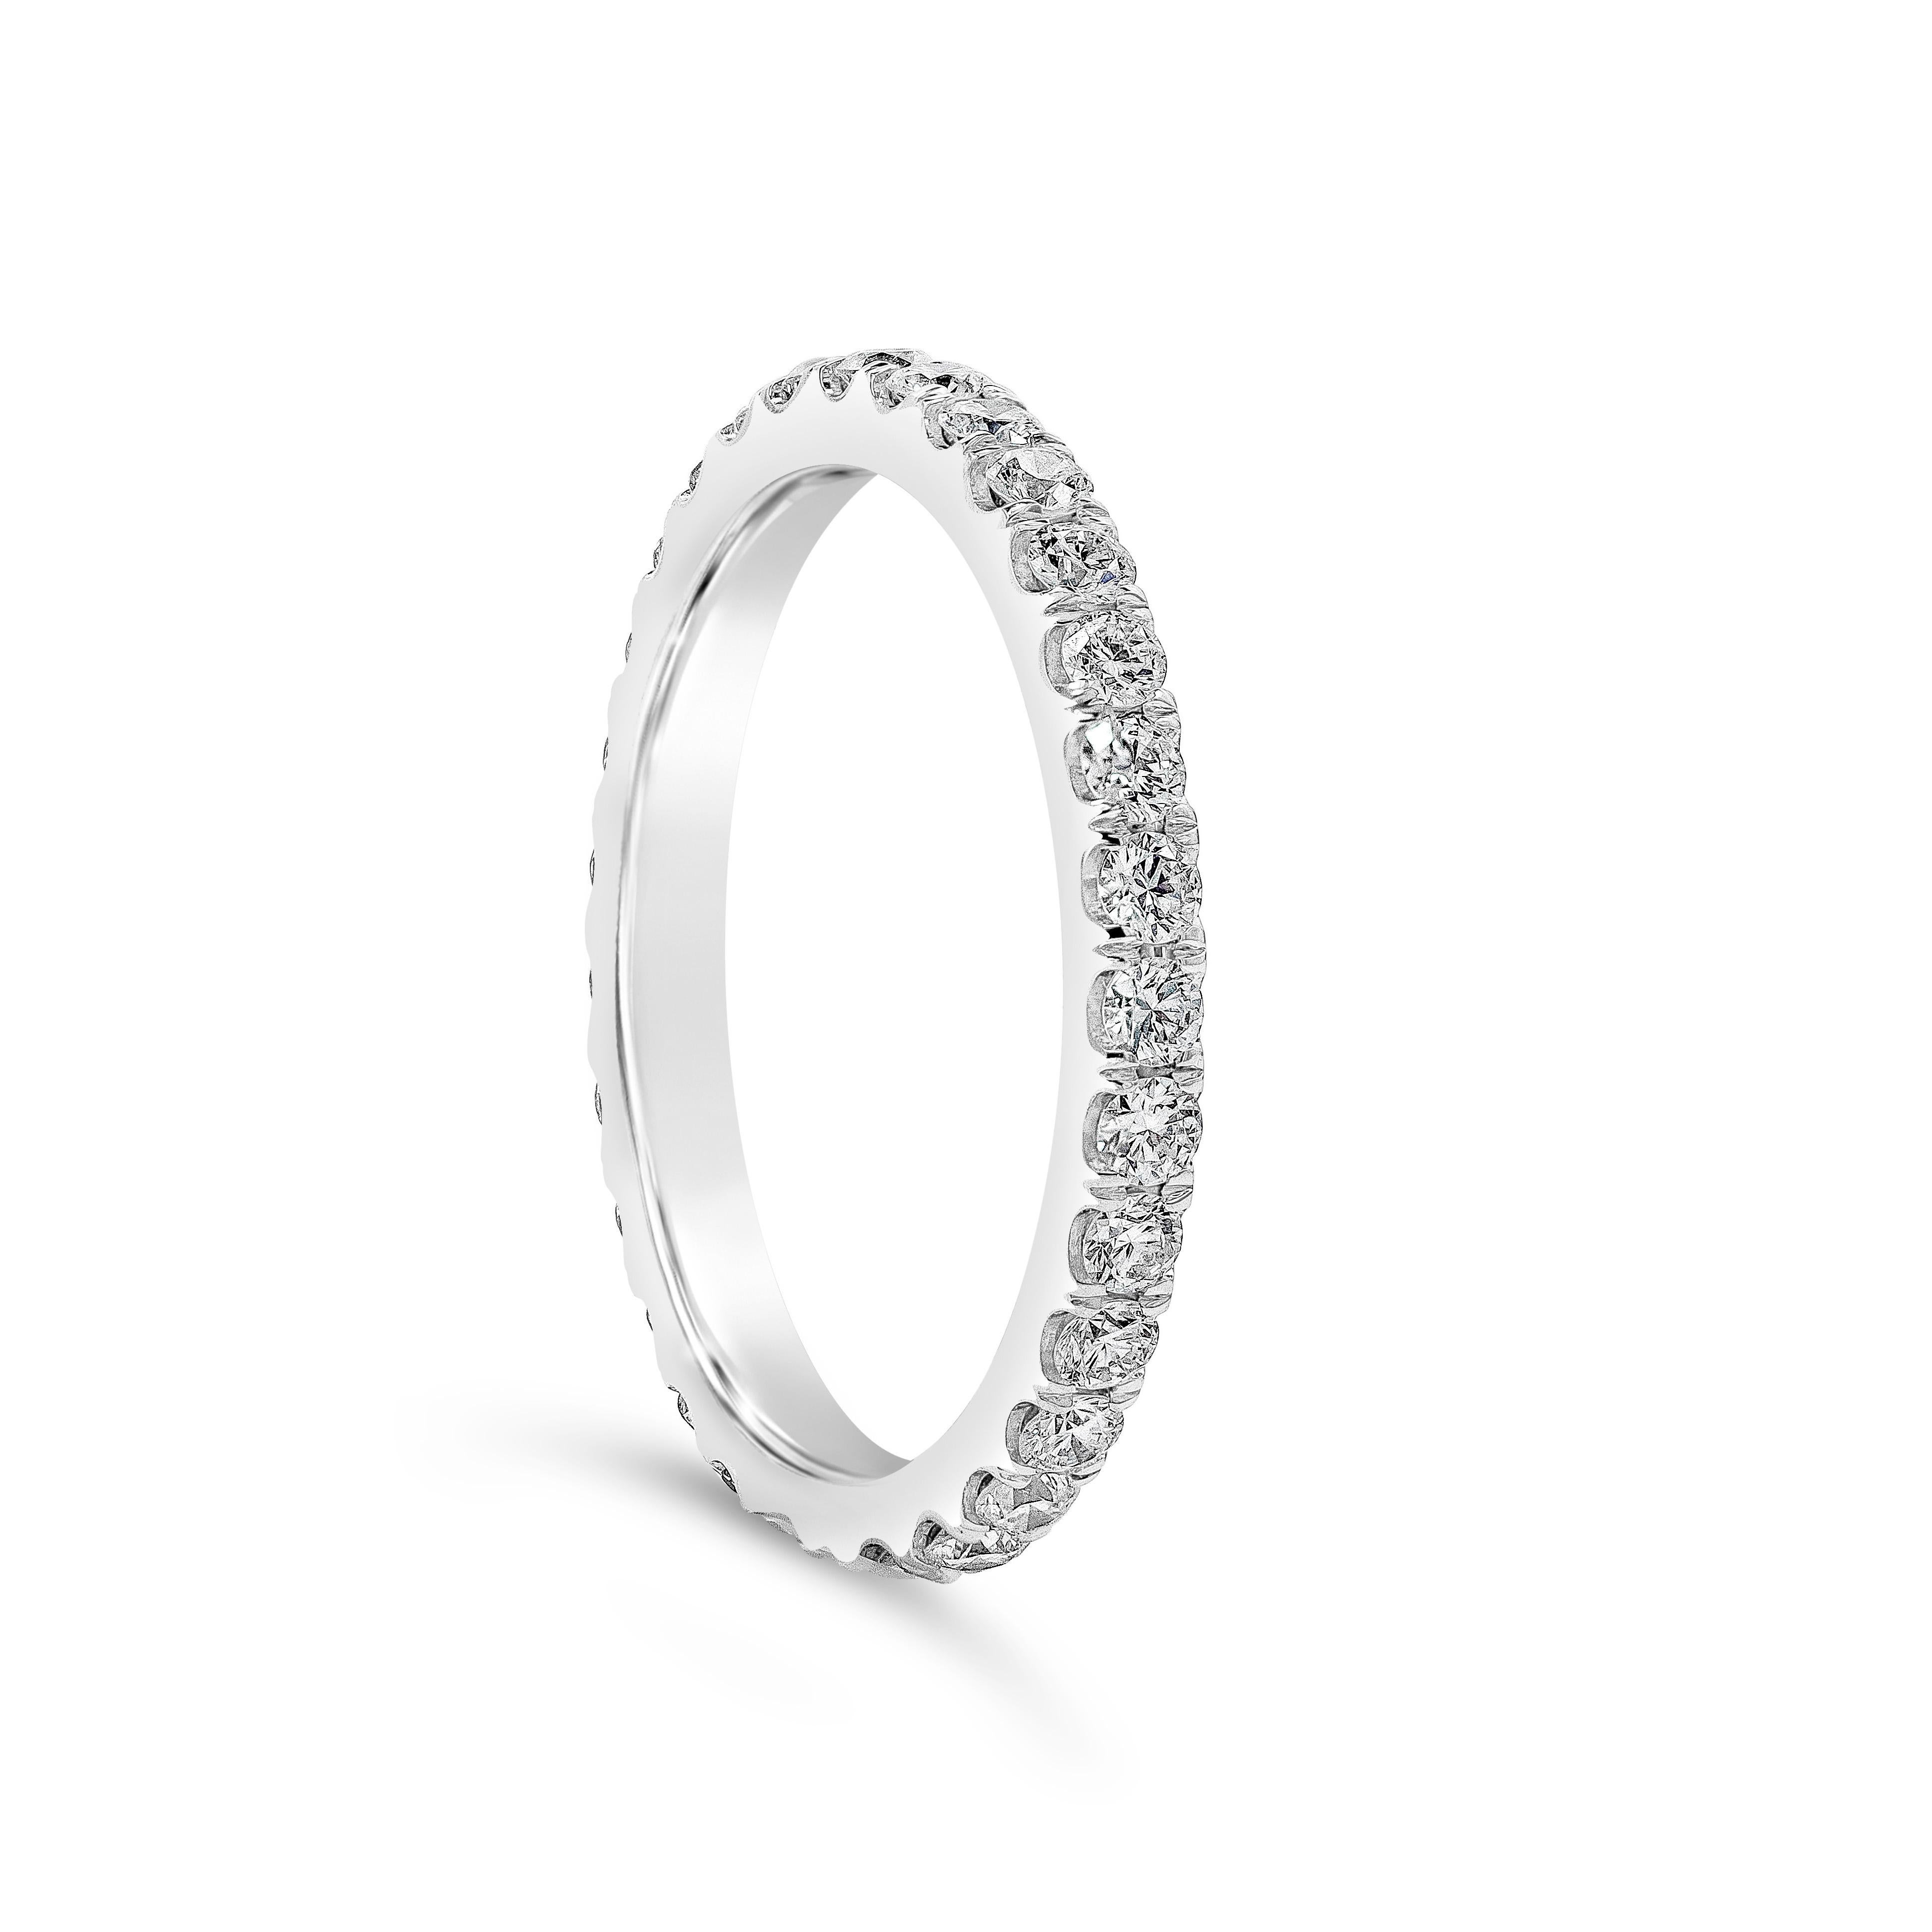 A classic eternity wedding band style showcasing a row of round brilliant diamonds weighing 0.65 carats total, G Color and VS in Clarity. Pave-set, Made with Platinum. Size 6.5 US

Roman Malakov is a custom house, specializing in creating anything